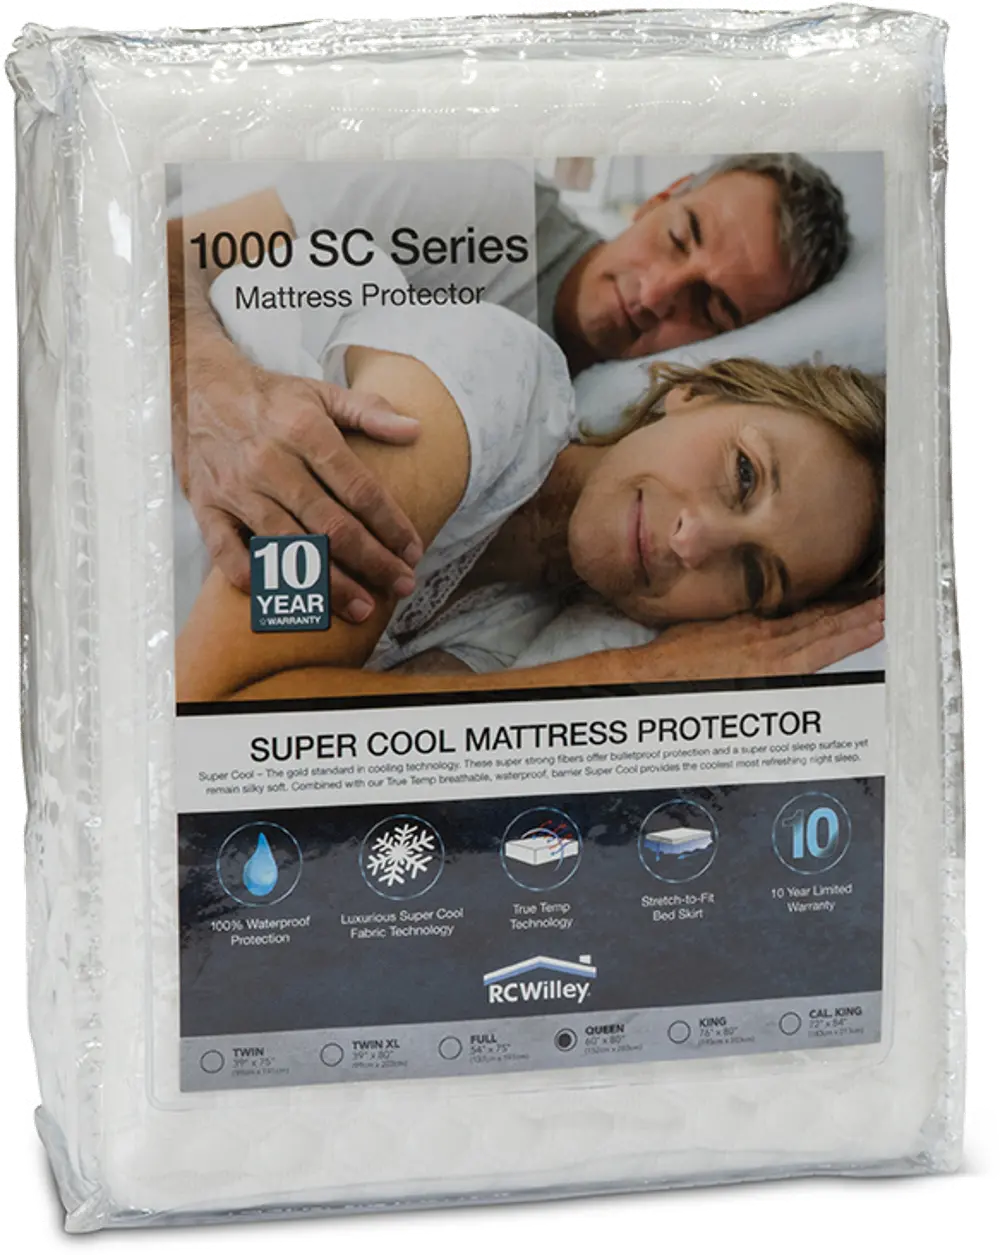 SuperCool King Size Mattress Pad and 10-Year Limited Protection Plan - 1000 SC-1